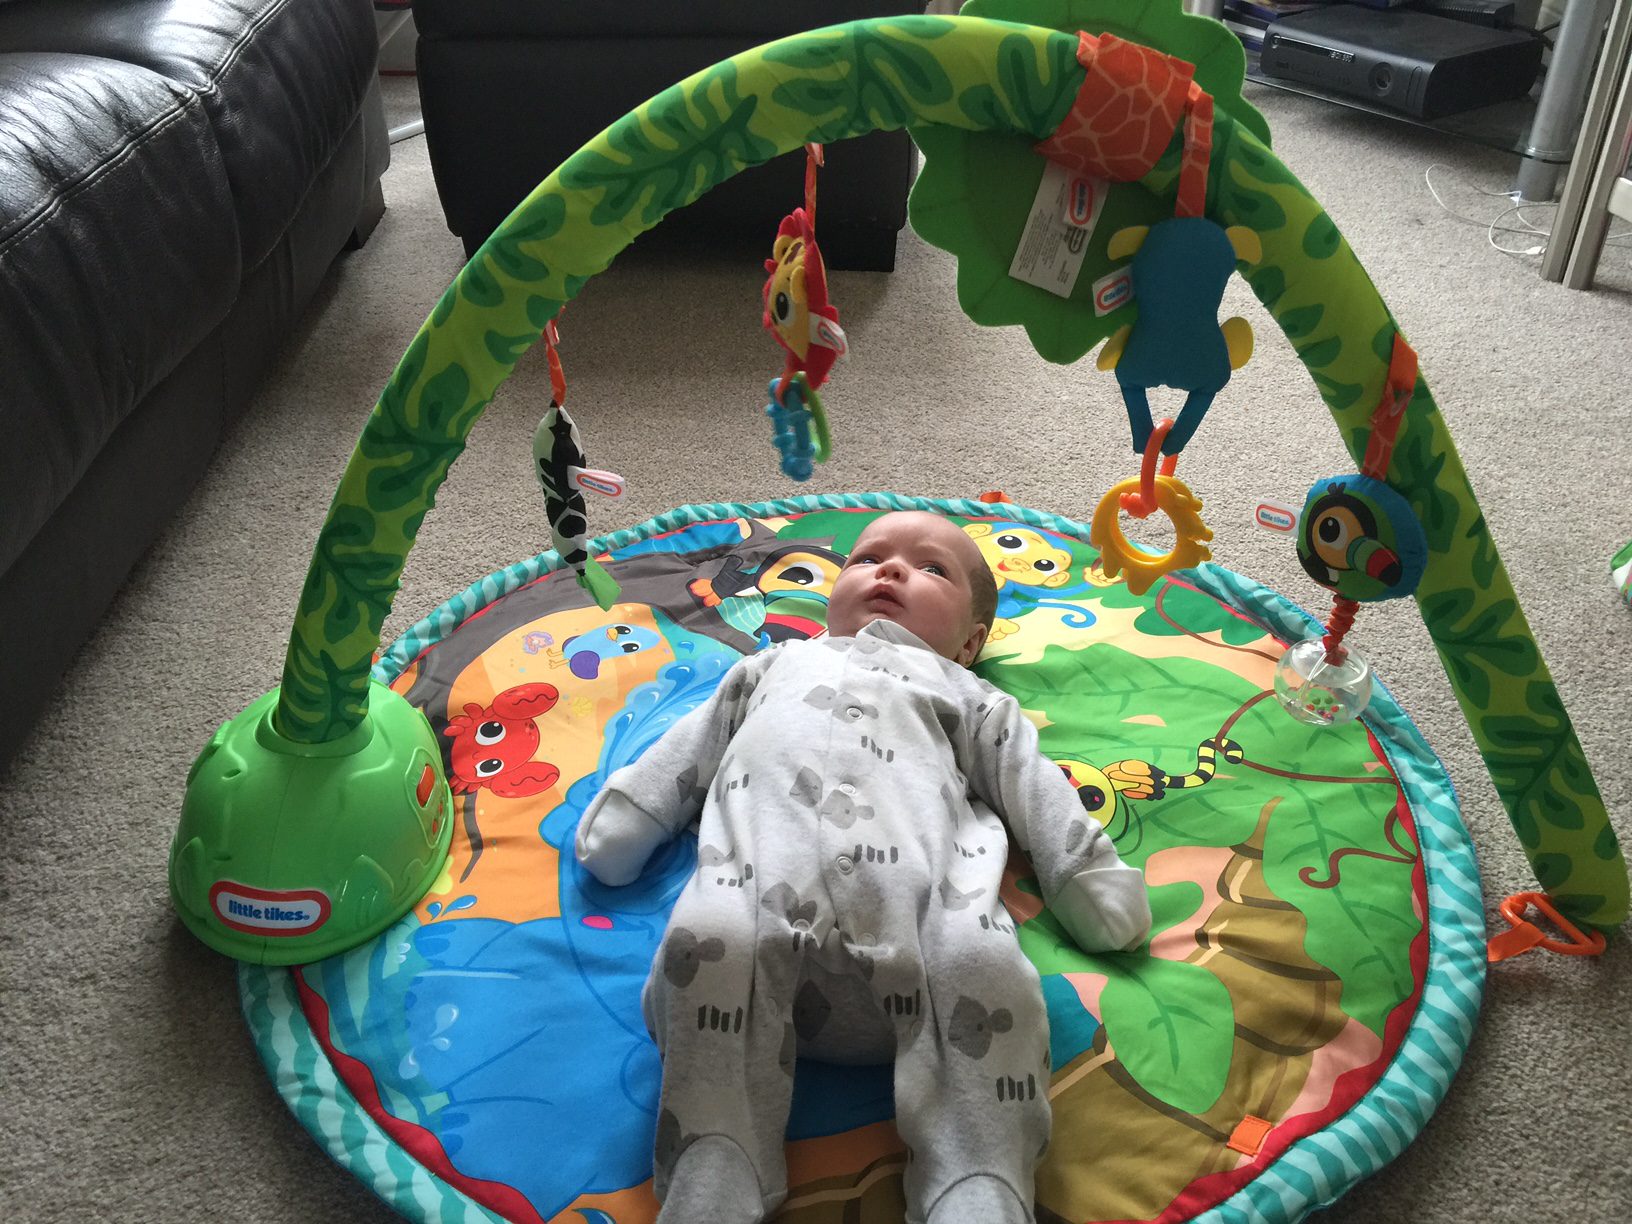 REVIEW – Little Tikes Sway ‘n Play Gym